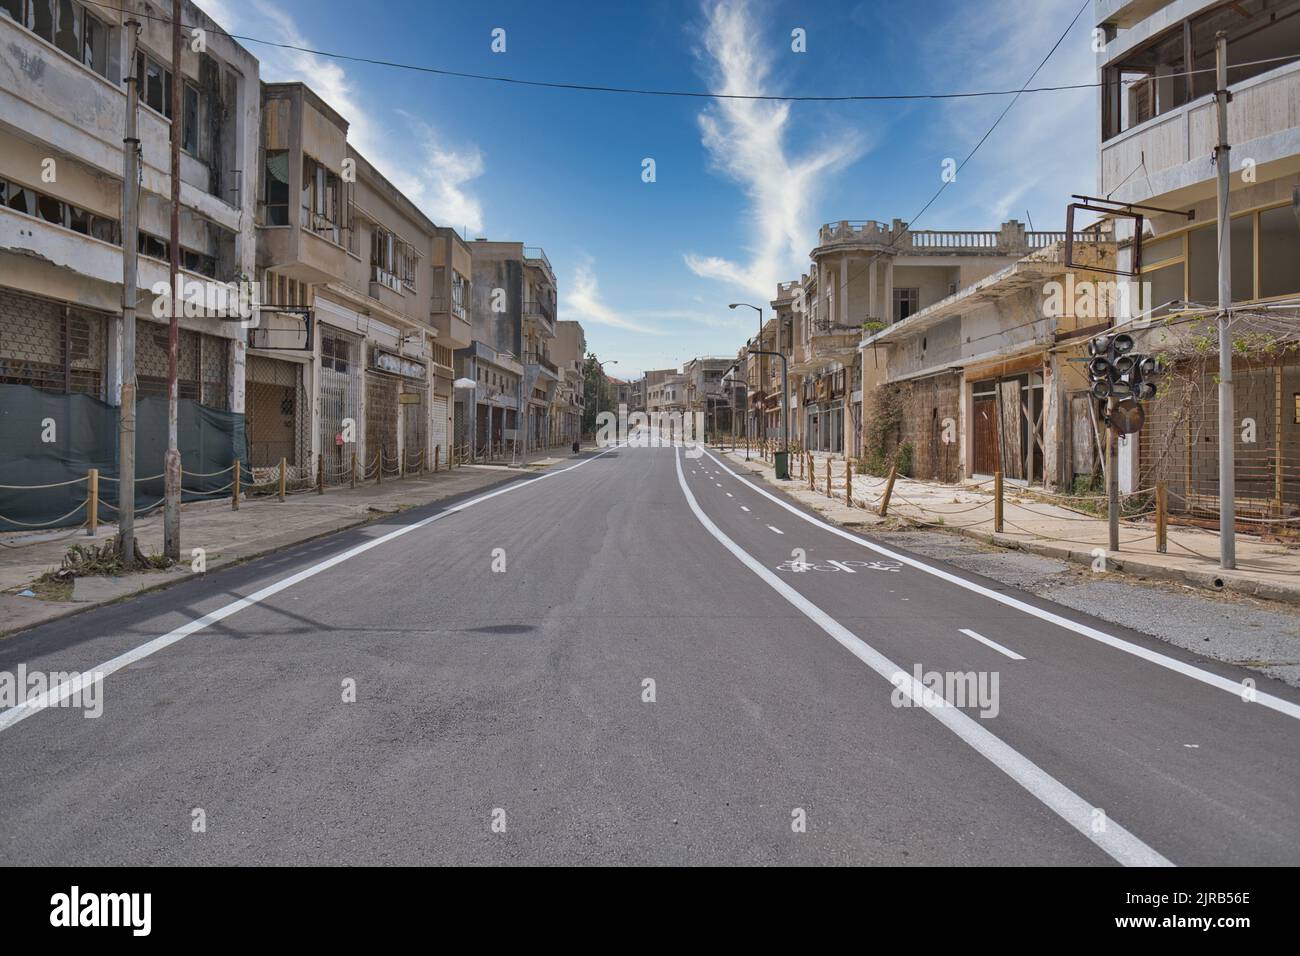 The abandoned city Varosha in Famagusta, North Cyprus. The local name is 'Kapali Maras' in Cyprus. Stock Photo